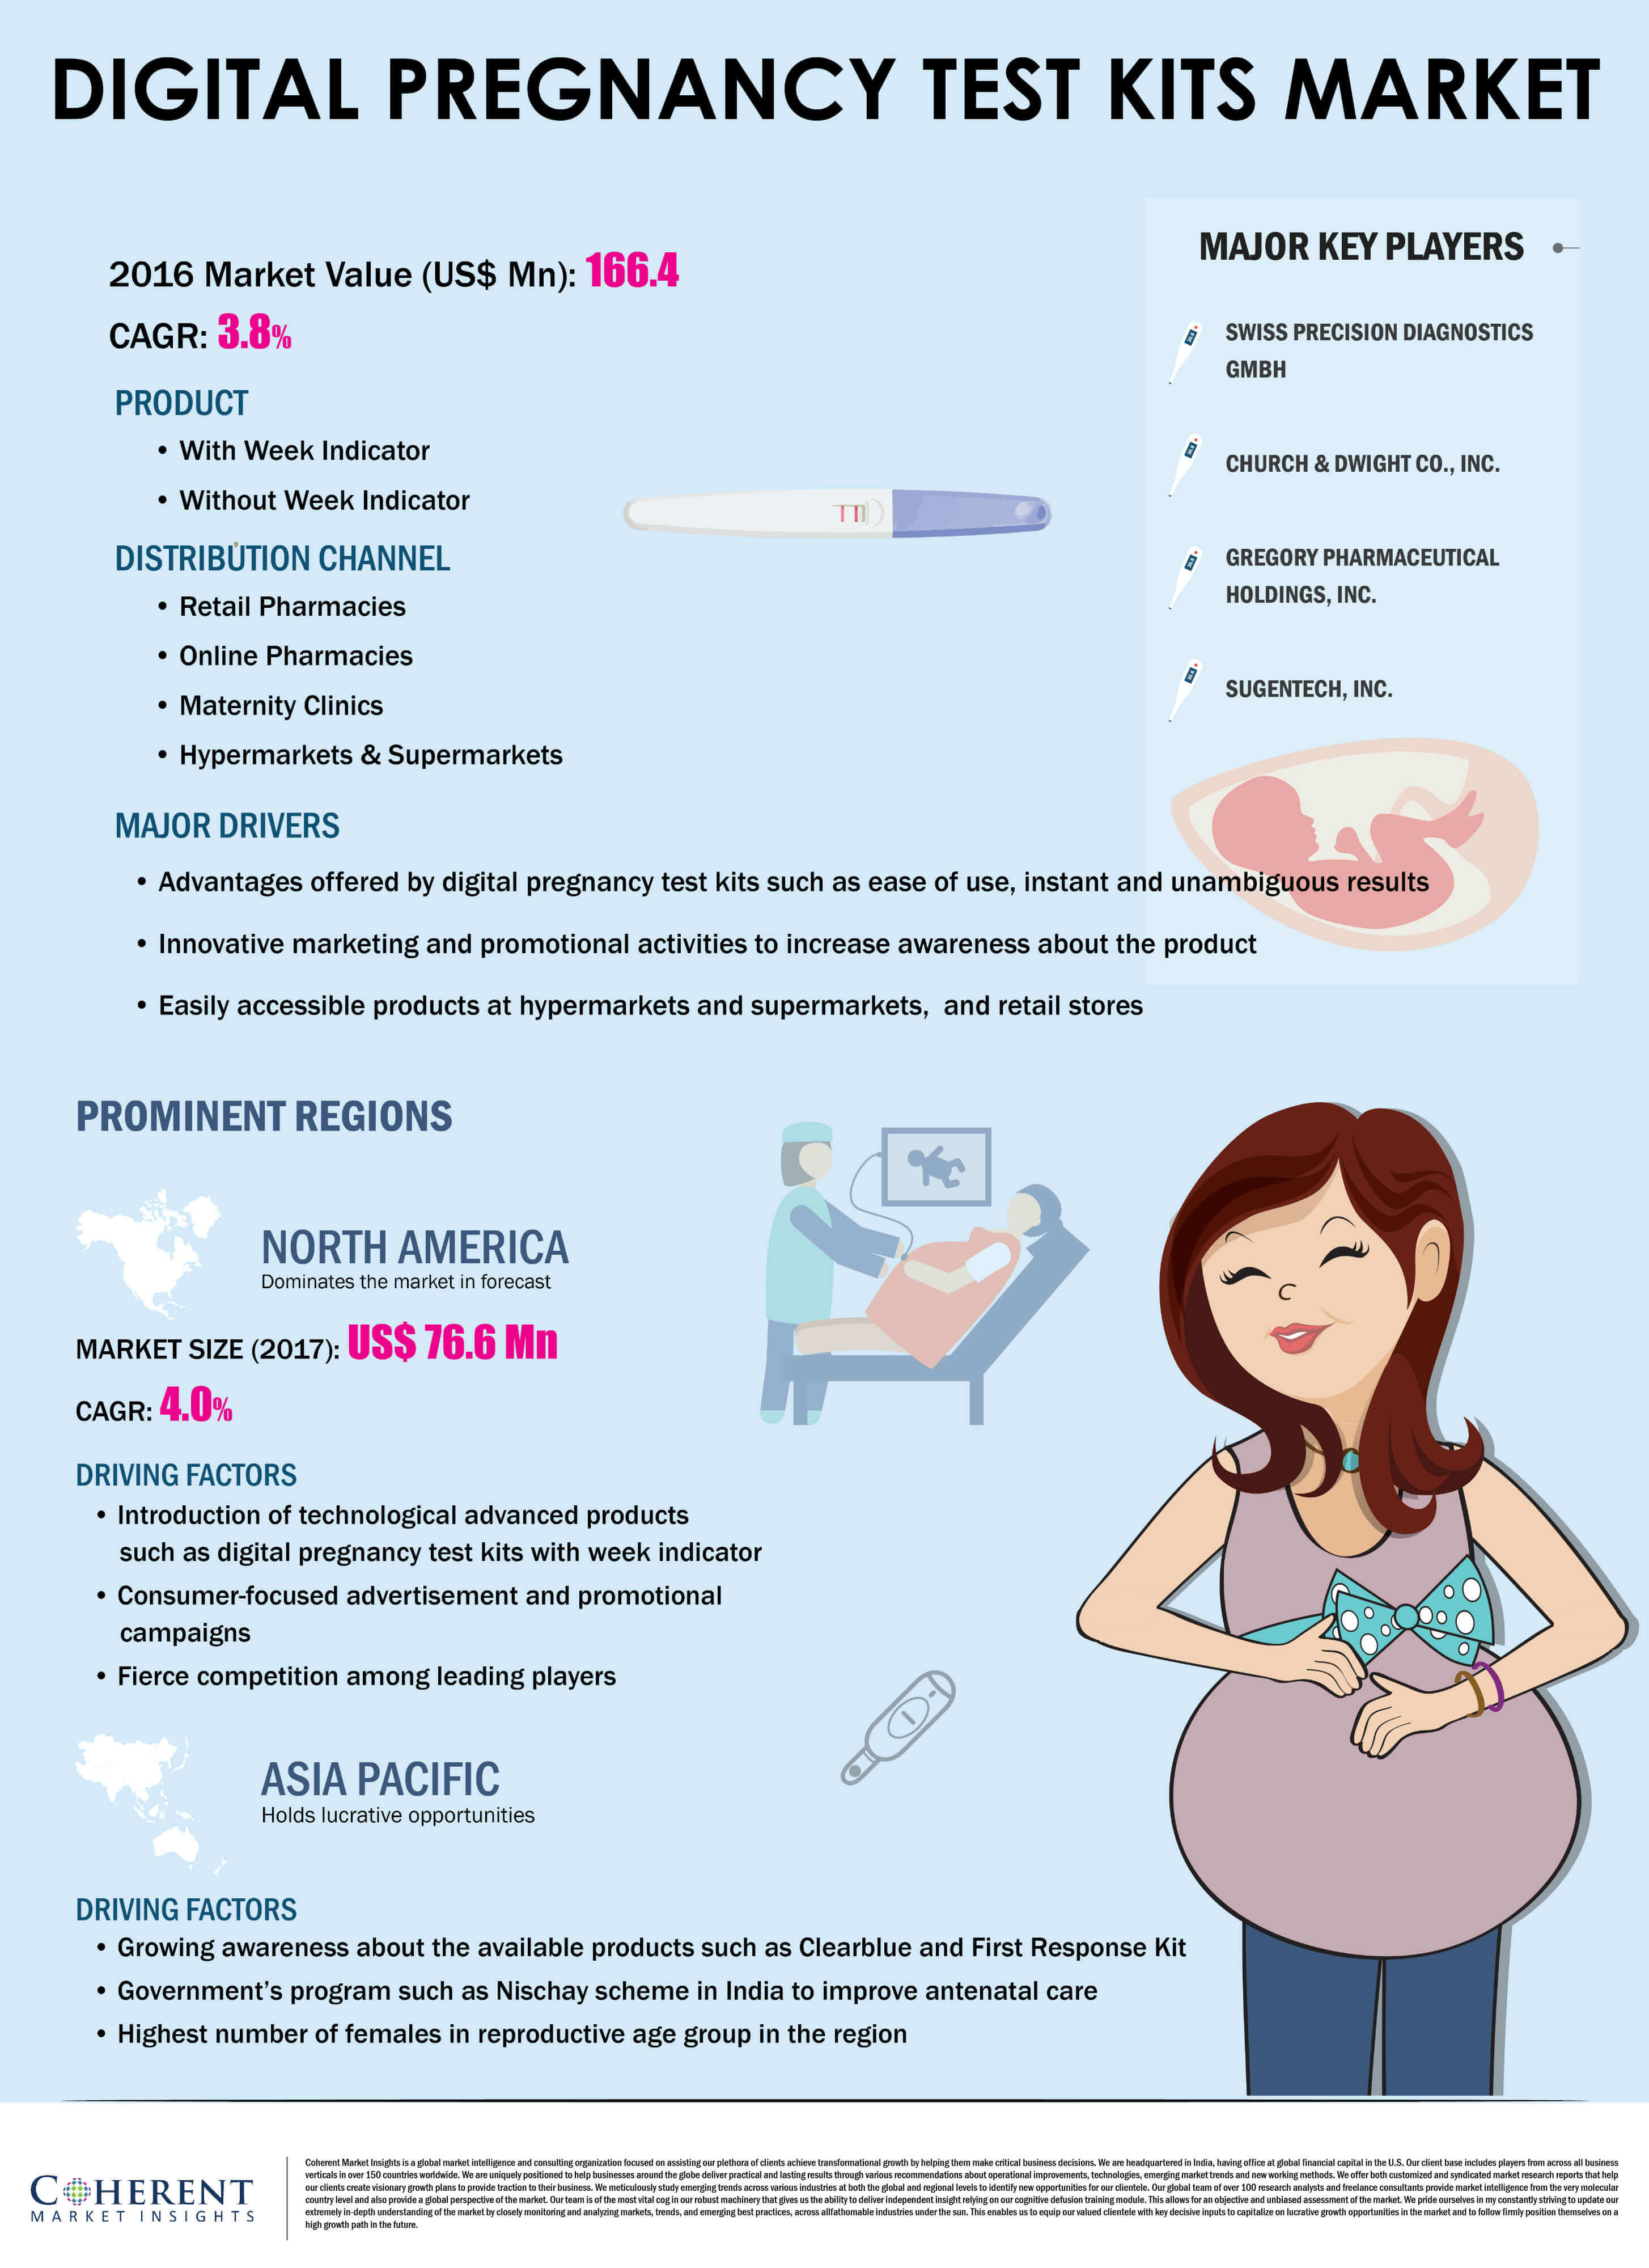 Digital Pregnancy Test Kits Market Size And Forecast To 2025